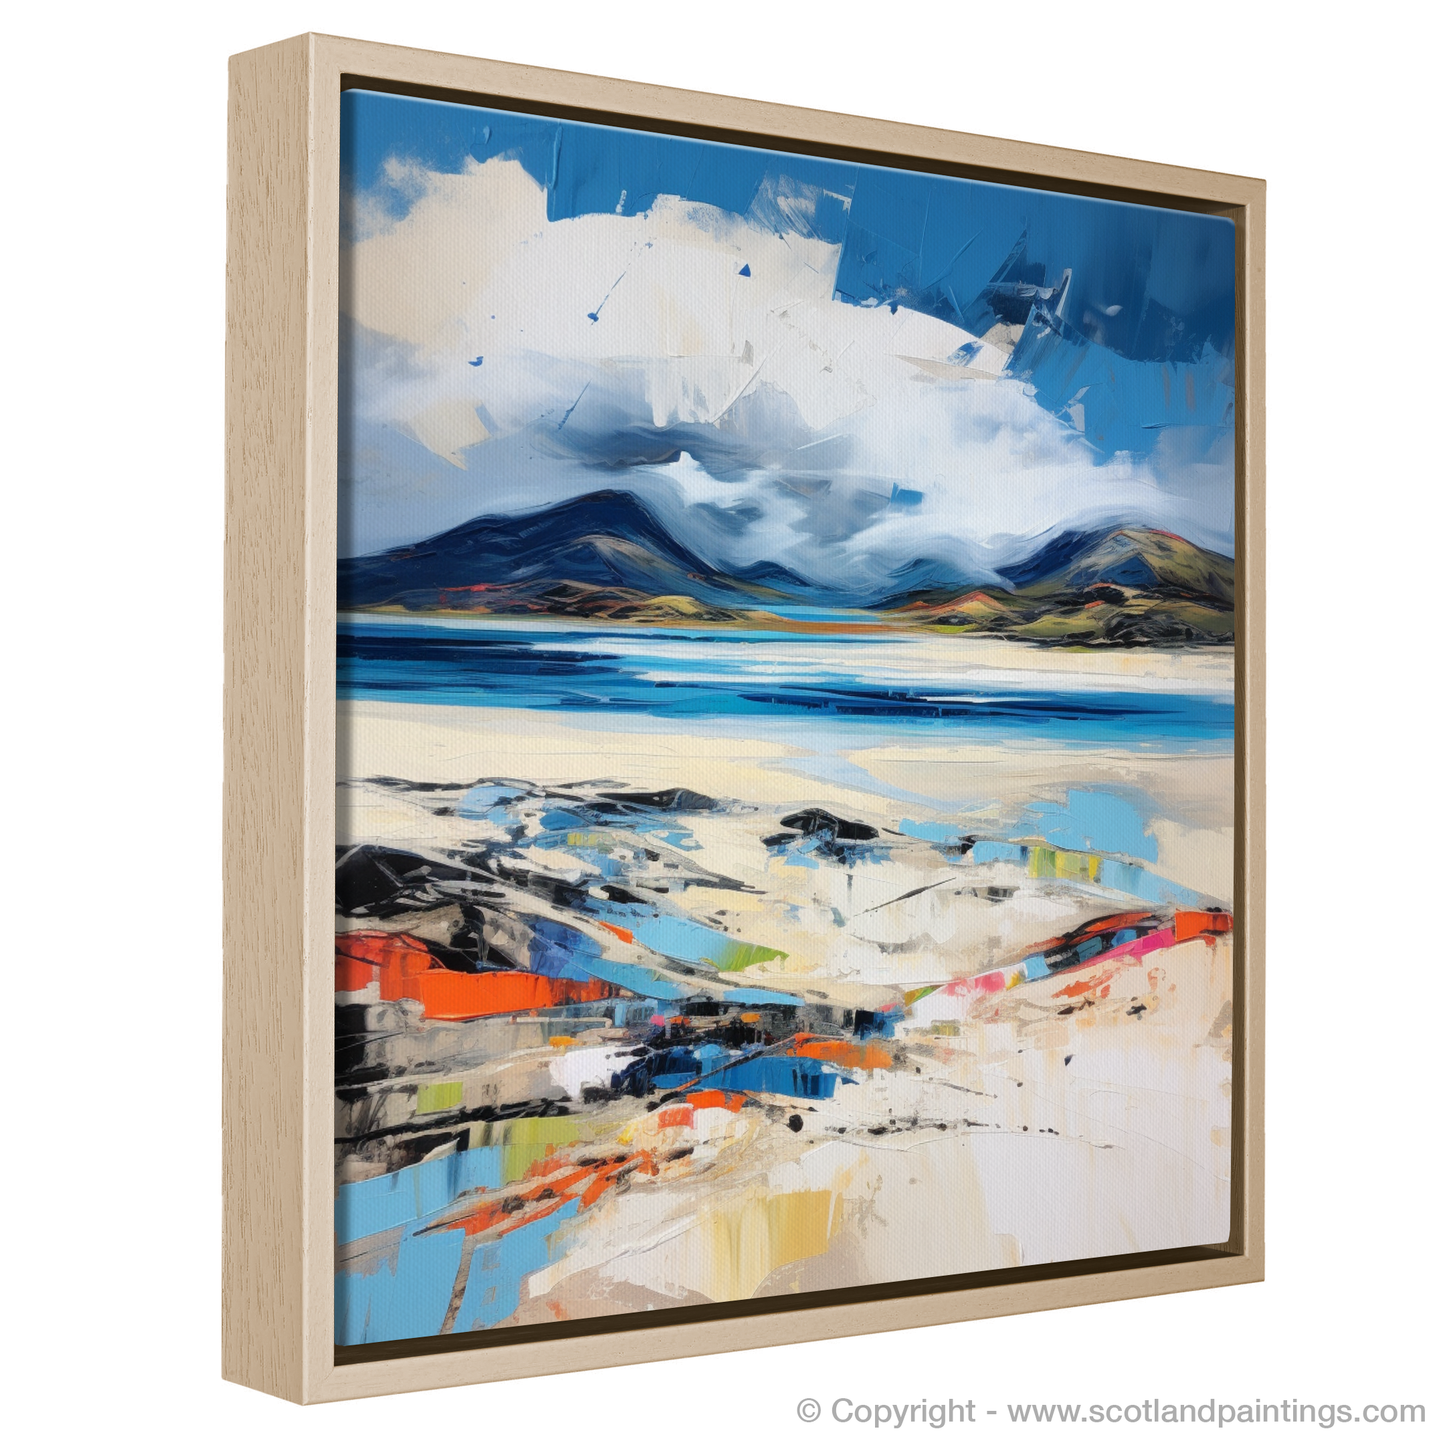 Painting and Art Print of Luskentyre Beach, Isle of Harris entitled "Luskentyre Beach's Wild Symphony - An Expressionist Journey".